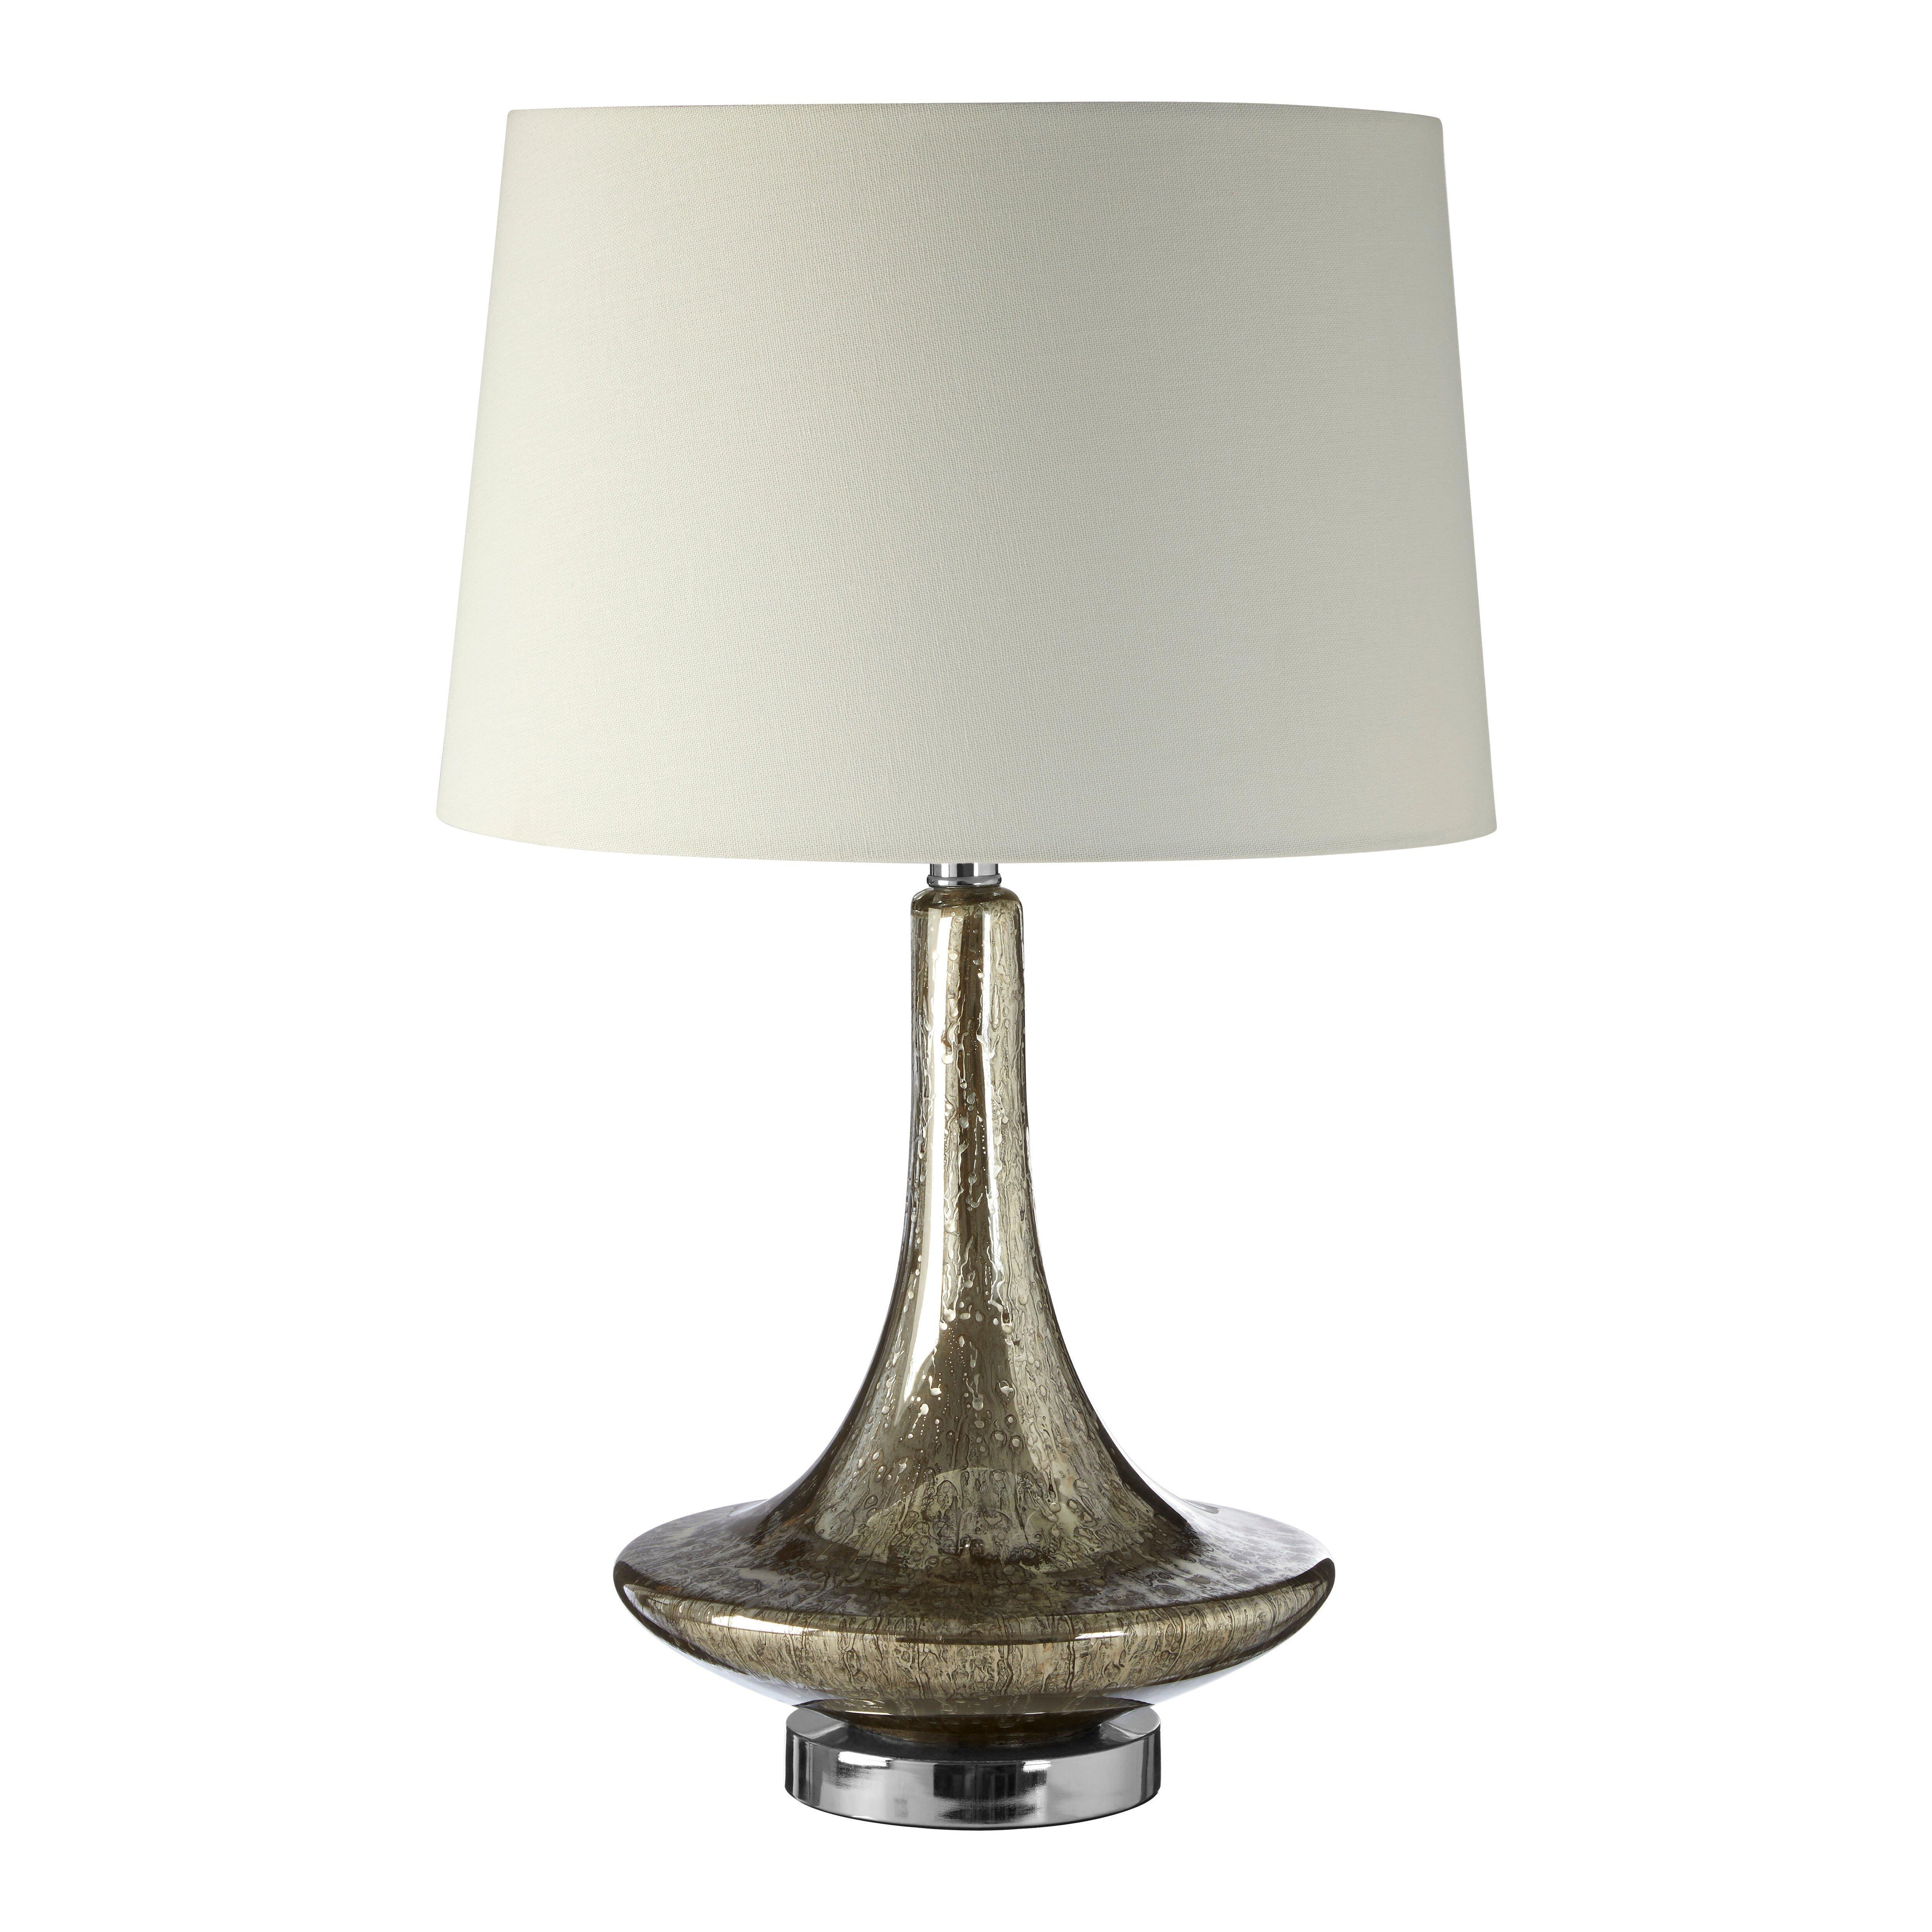 Interiors by Premier Mercury Table Lamp - image 1